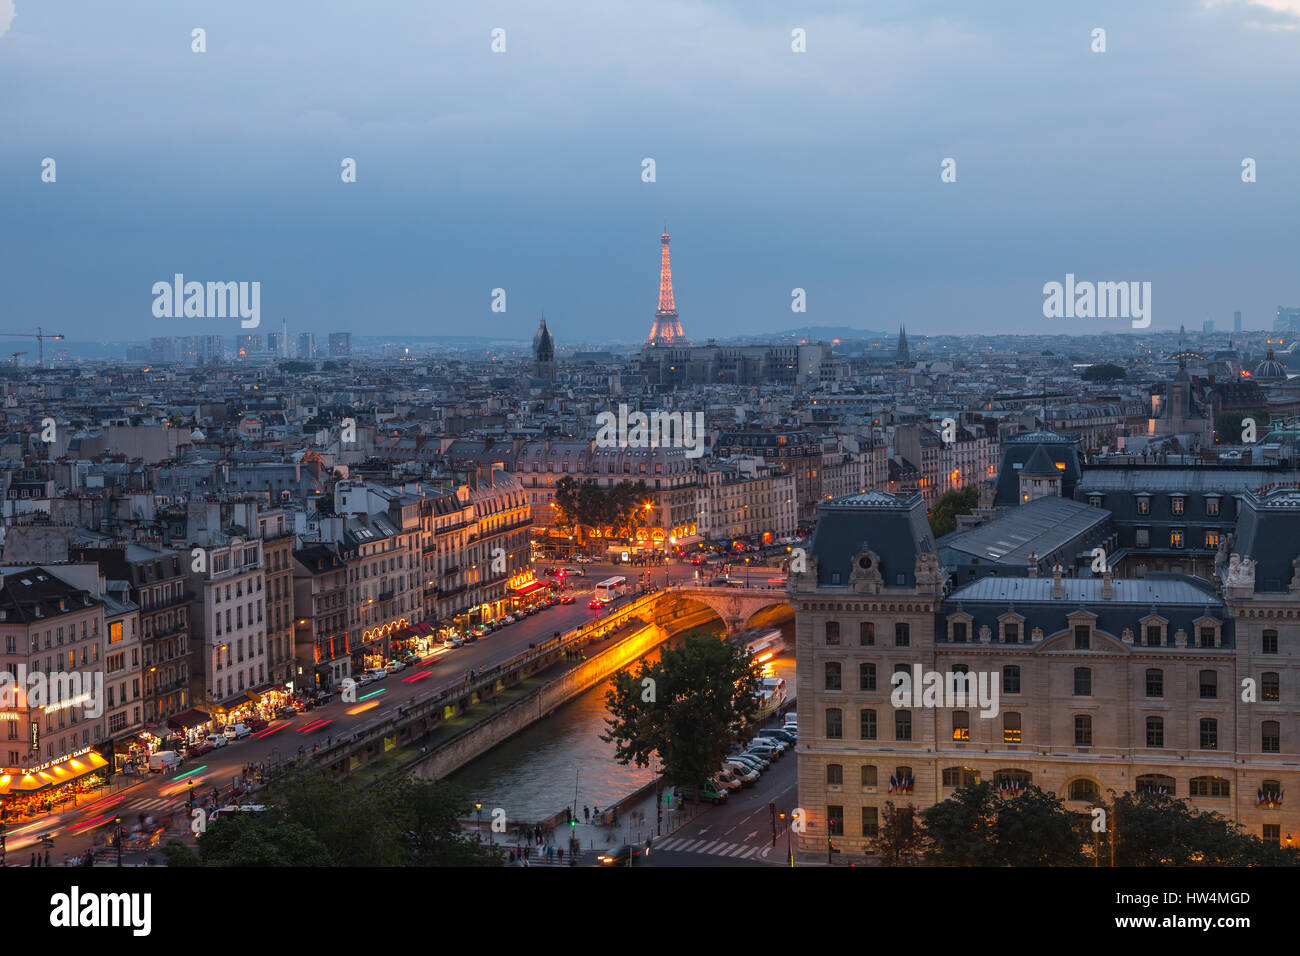 PARIS - JULY 15, 2014 : Eiffel Tower and Seine river in the night time on July 15,2014 in Paris. Night view from the rooftop of Notre Dame Cathedral i Stock Photo